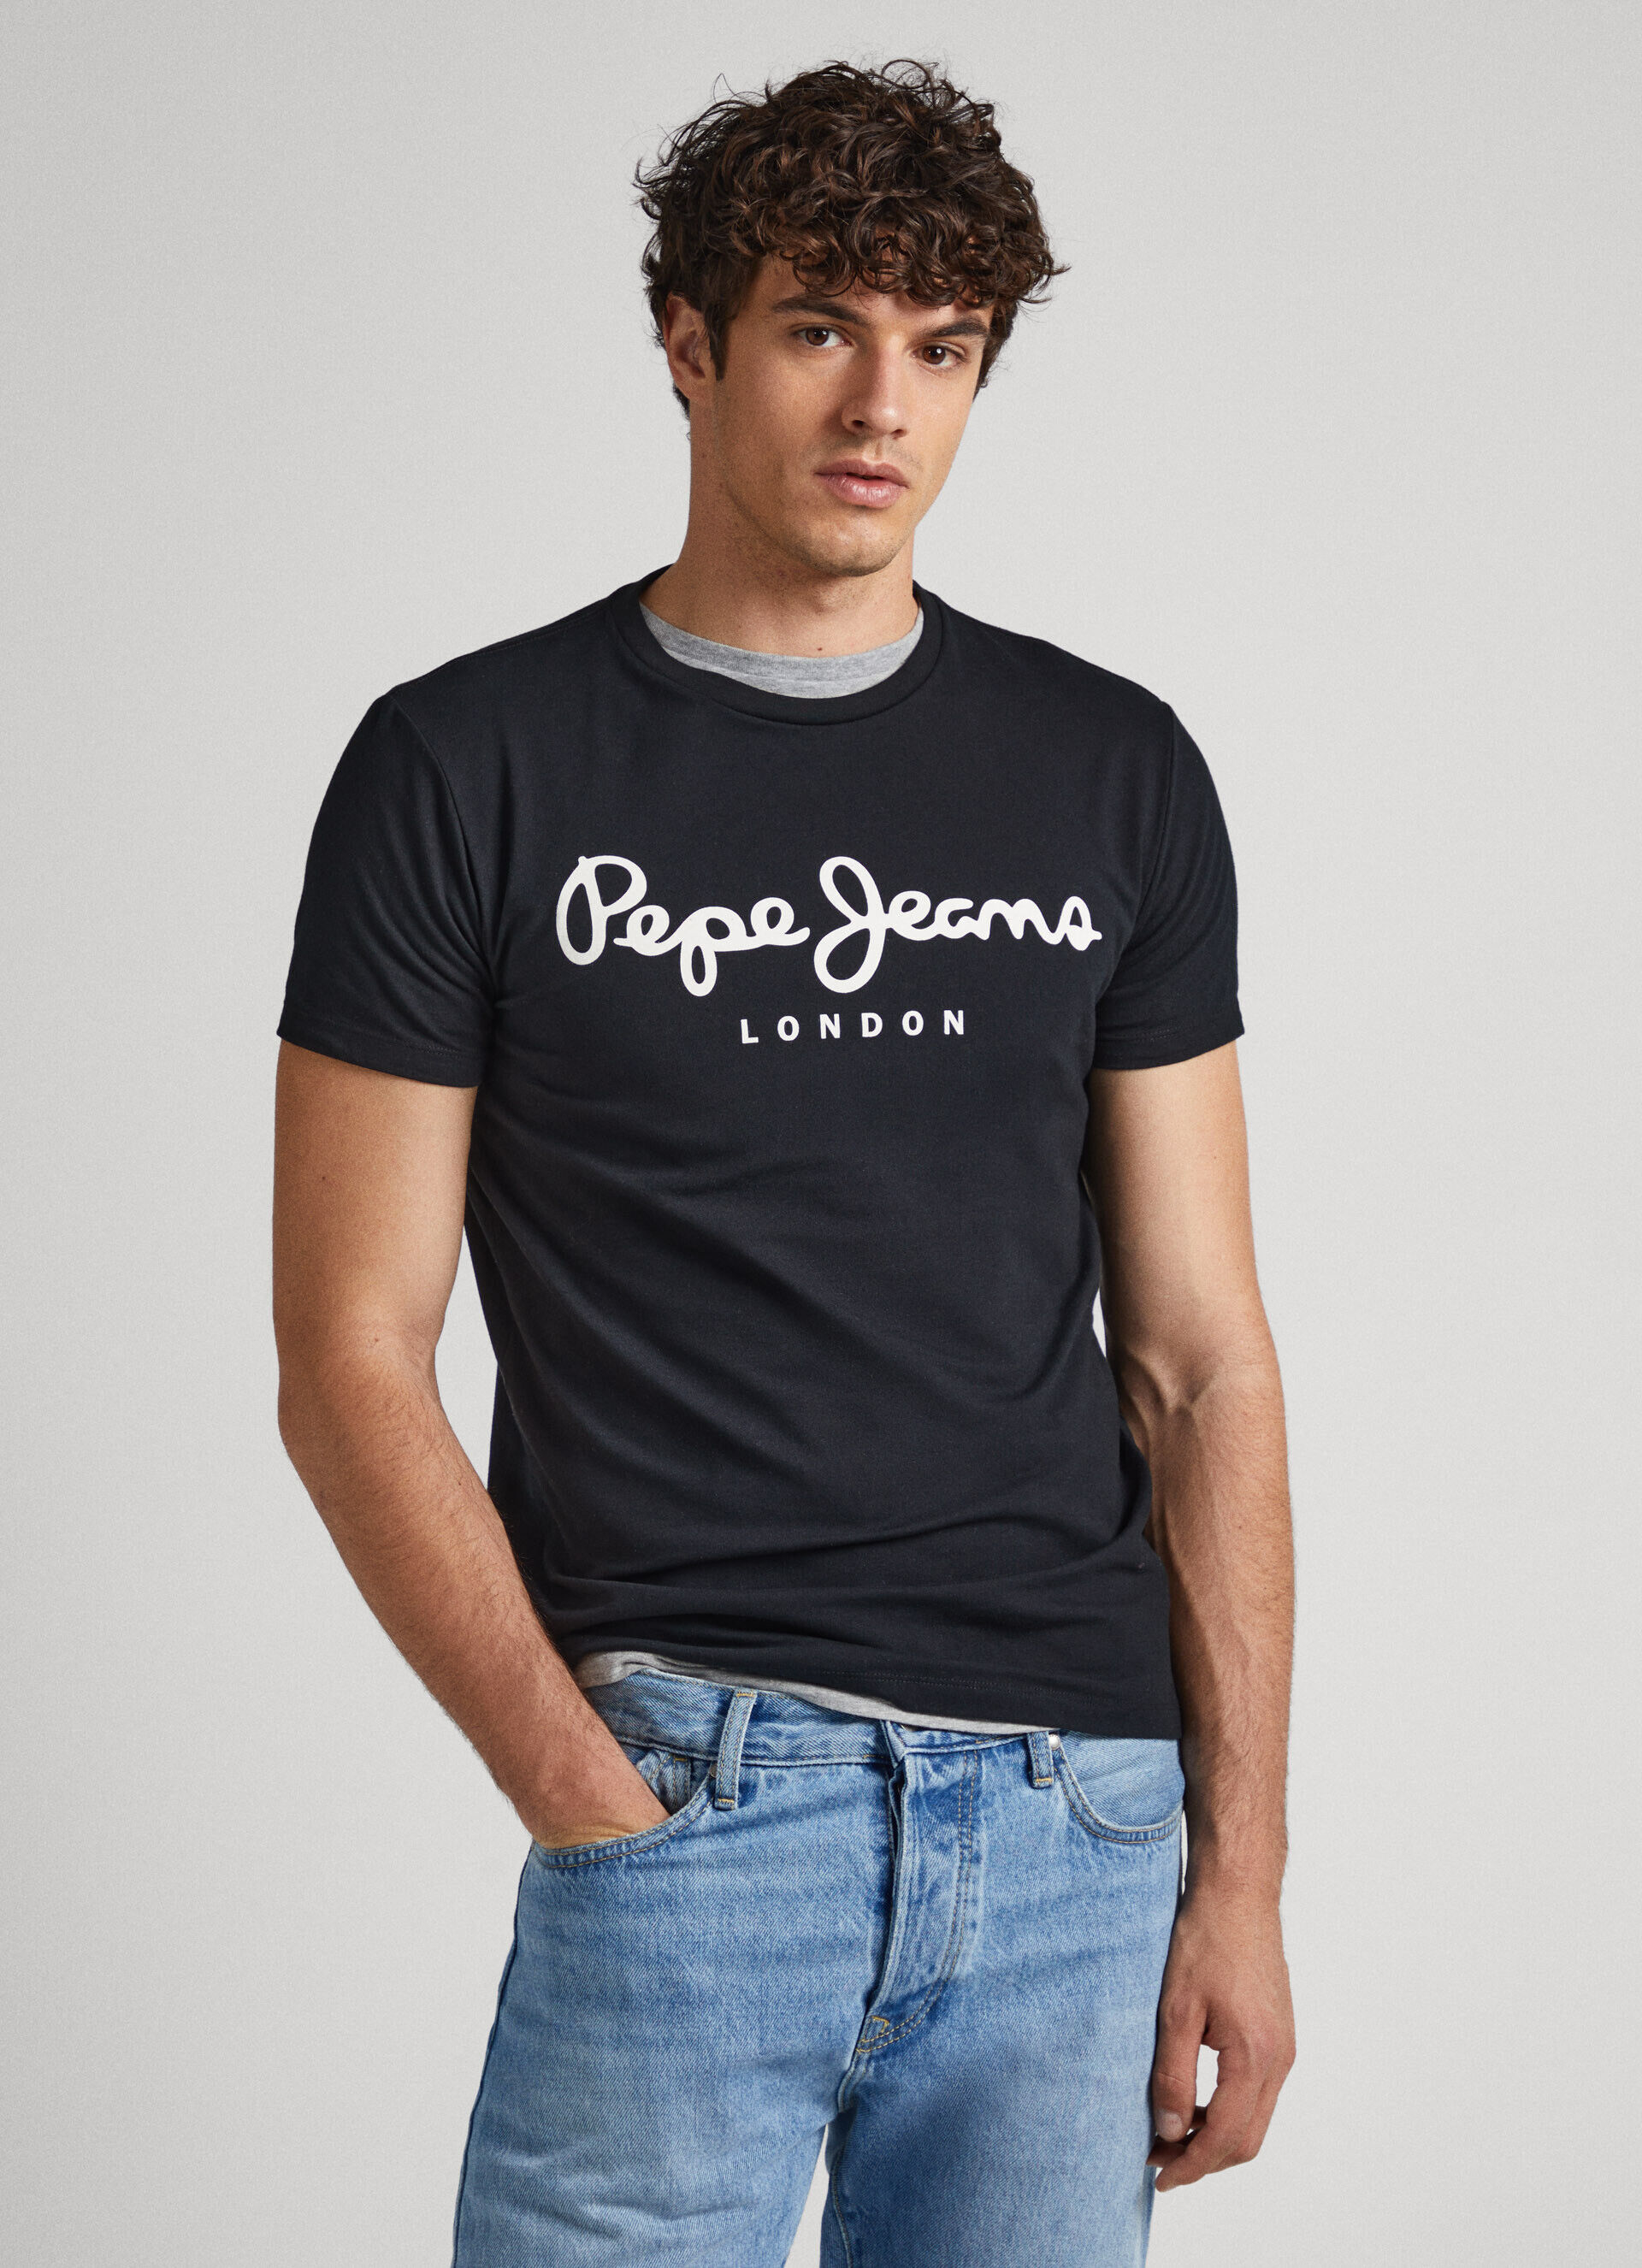 noir Tee-shirts Pepe Jeans Homme M Tee-shirt PEPE JEANS 2 Homme Vêtements Pepe Jeans Homme Tee-shirts & Polos Pepe Jeans Homme Tee-shirts Pepe Jeans Homme 